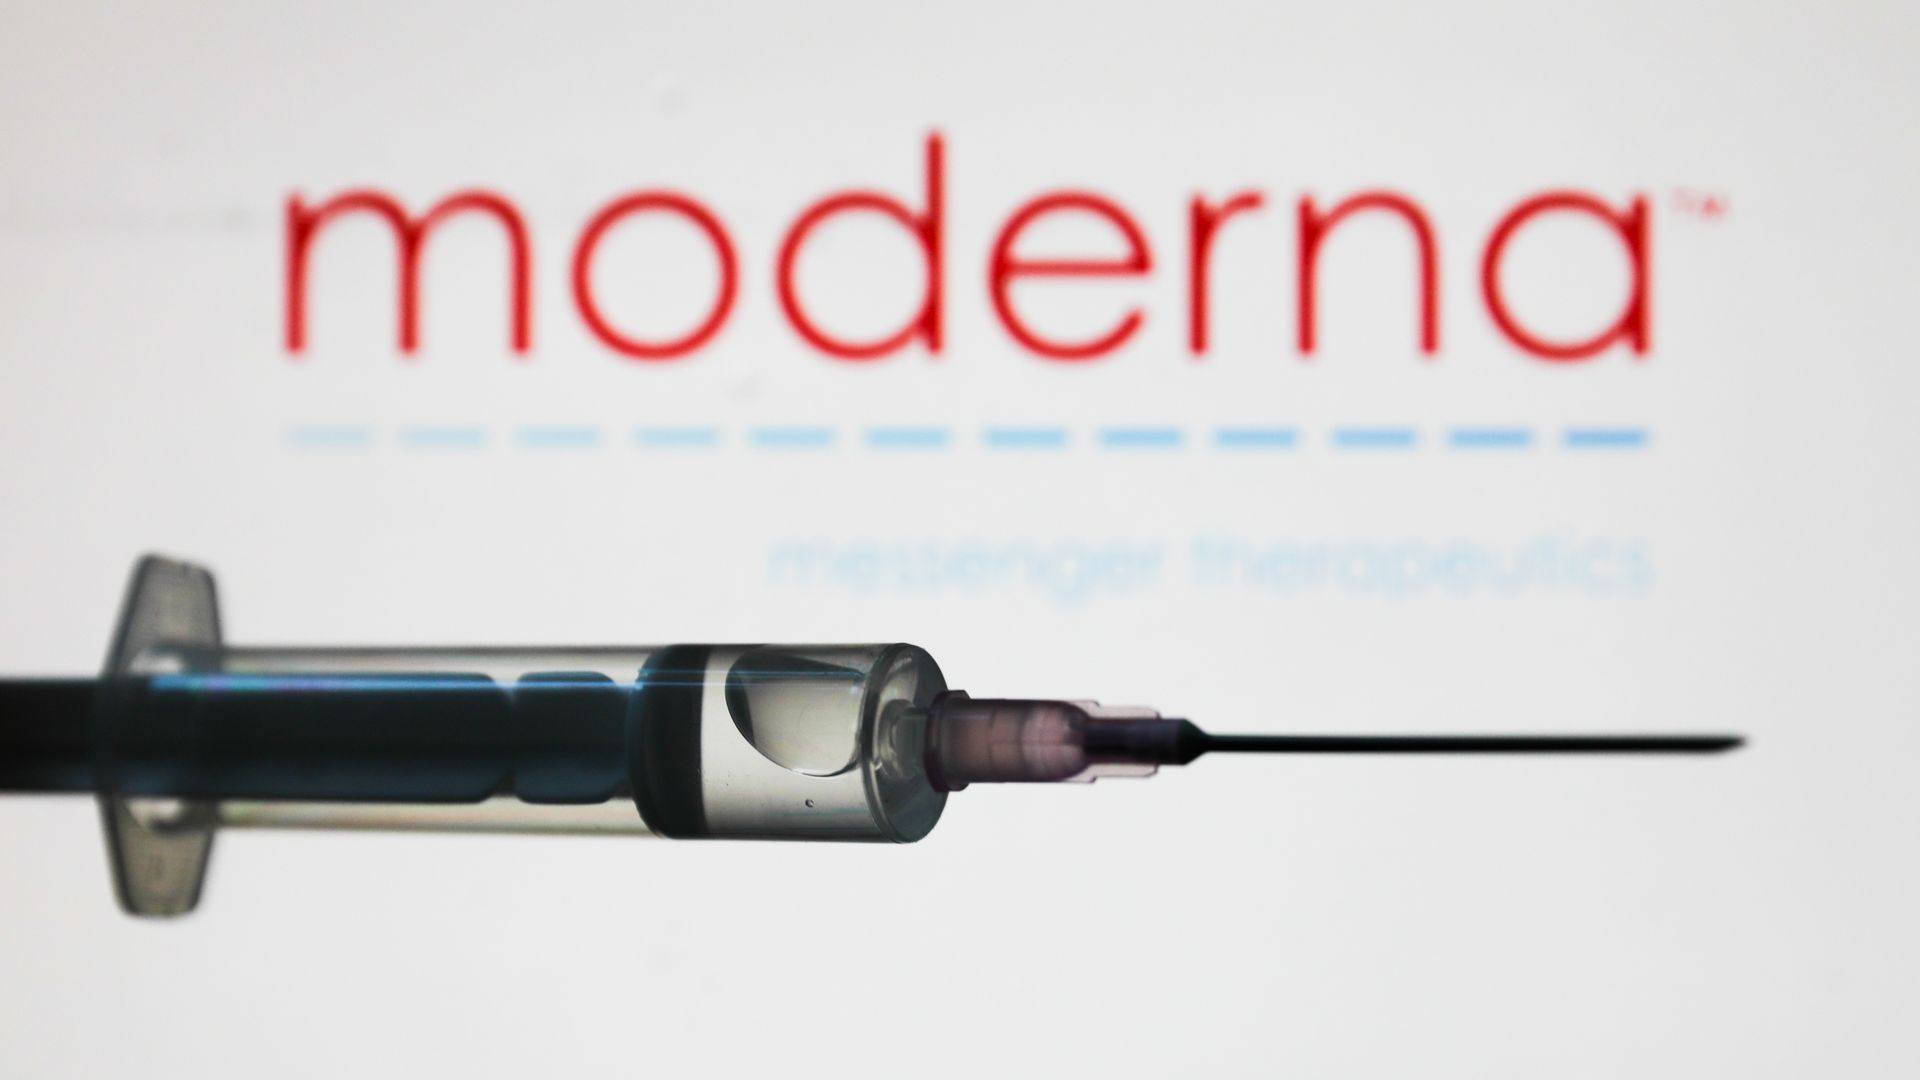 Moderna's red logo in the background with a vaccine syringe in the foreground.